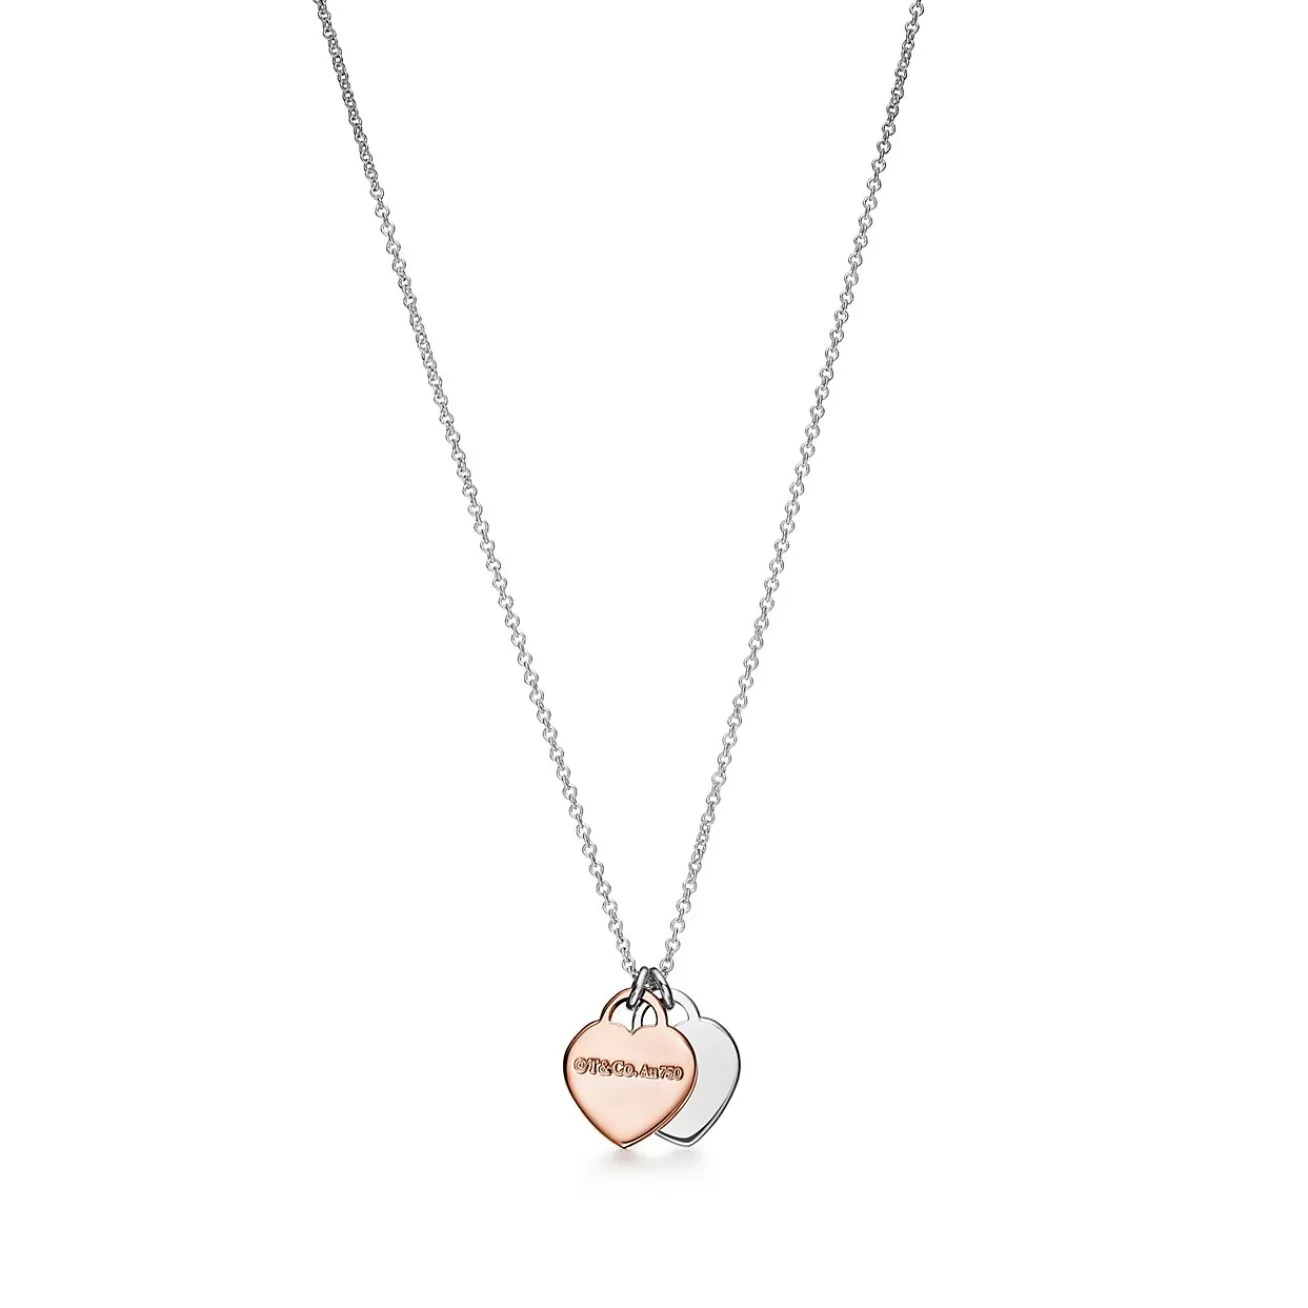 Tiffany & Co. Return to Tiffany® Double Heart Tag Pendant in Silver and Rose Gold, Mini | ^ Necklaces & Pendants | Dainty Jewelry